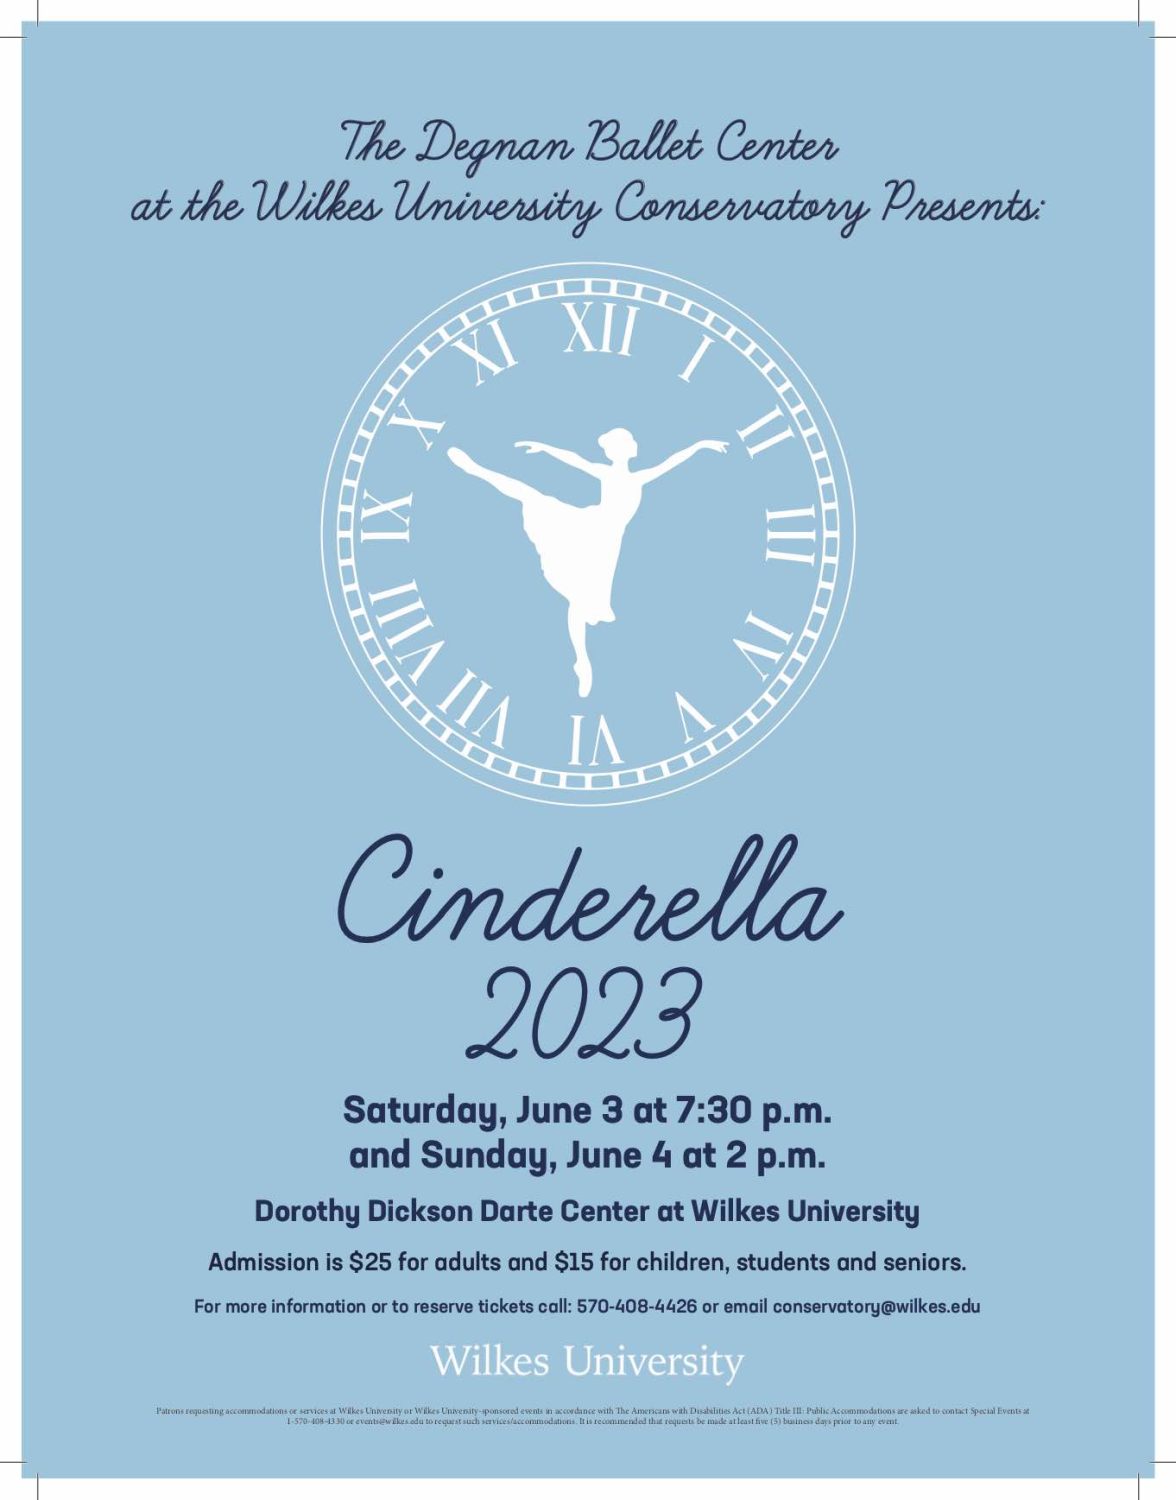 poster for cinderella featuring ballet dancer silhouette dancing in front of the face of a clock